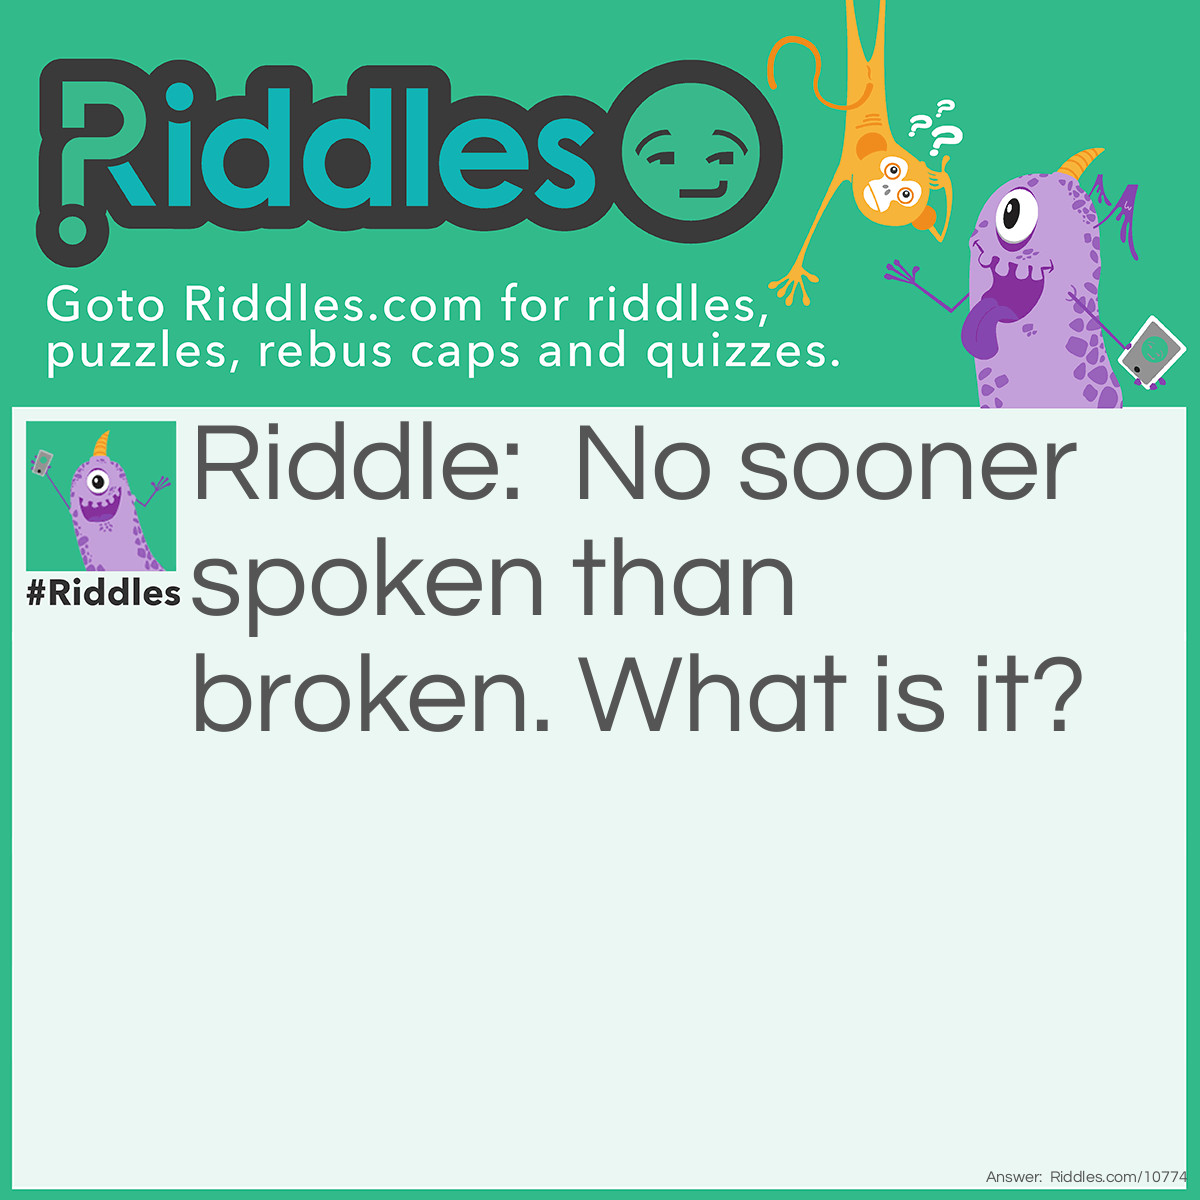 Riddle: No sooner spoken than broken. What is it? Answer: Silence